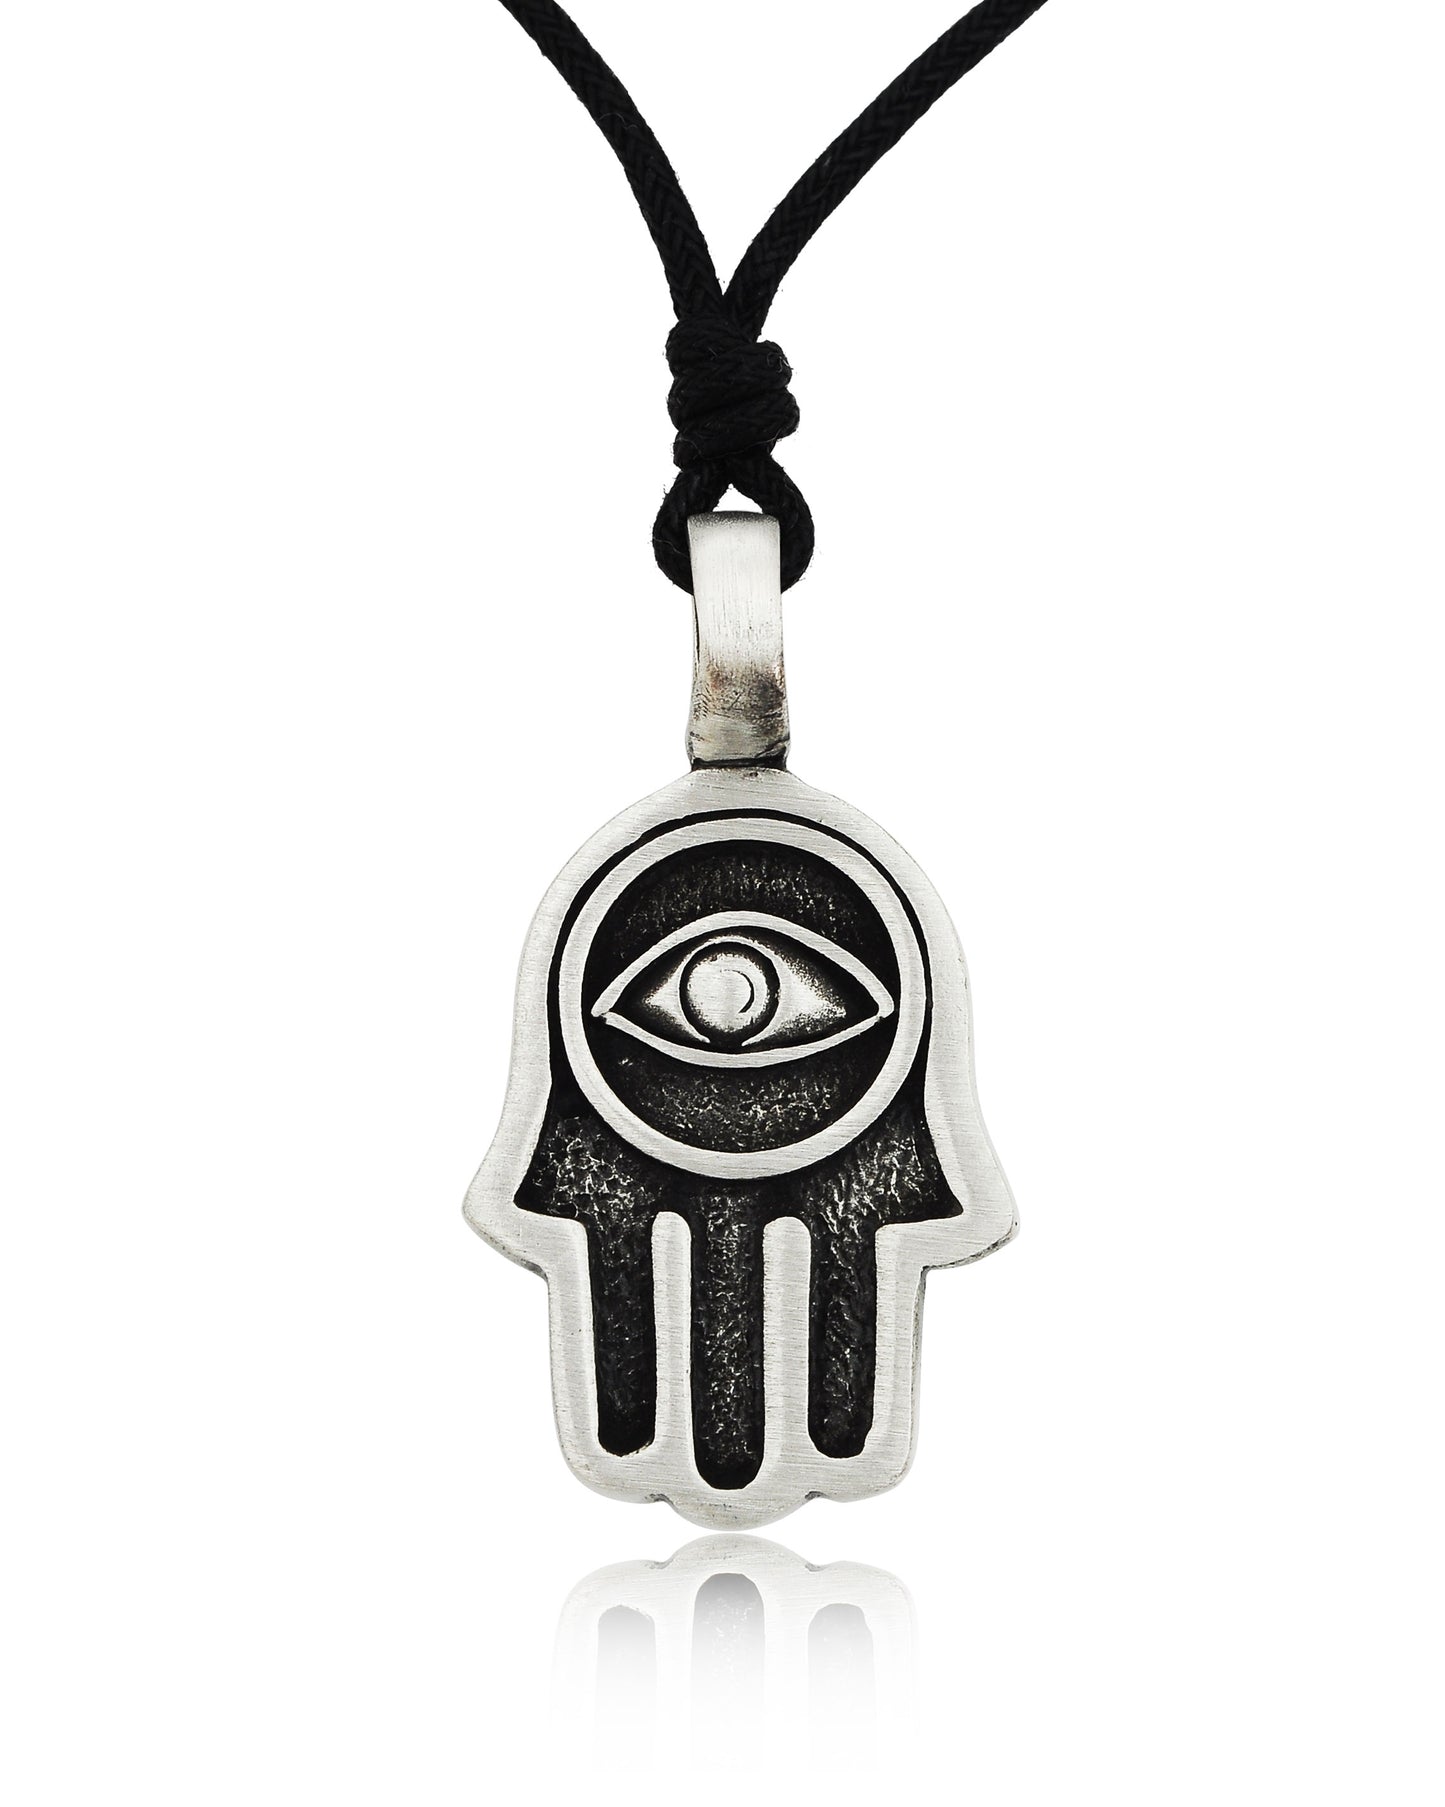 Hamsa Hand of God Silver Pewter Charm Necklace Pendant Jewelry